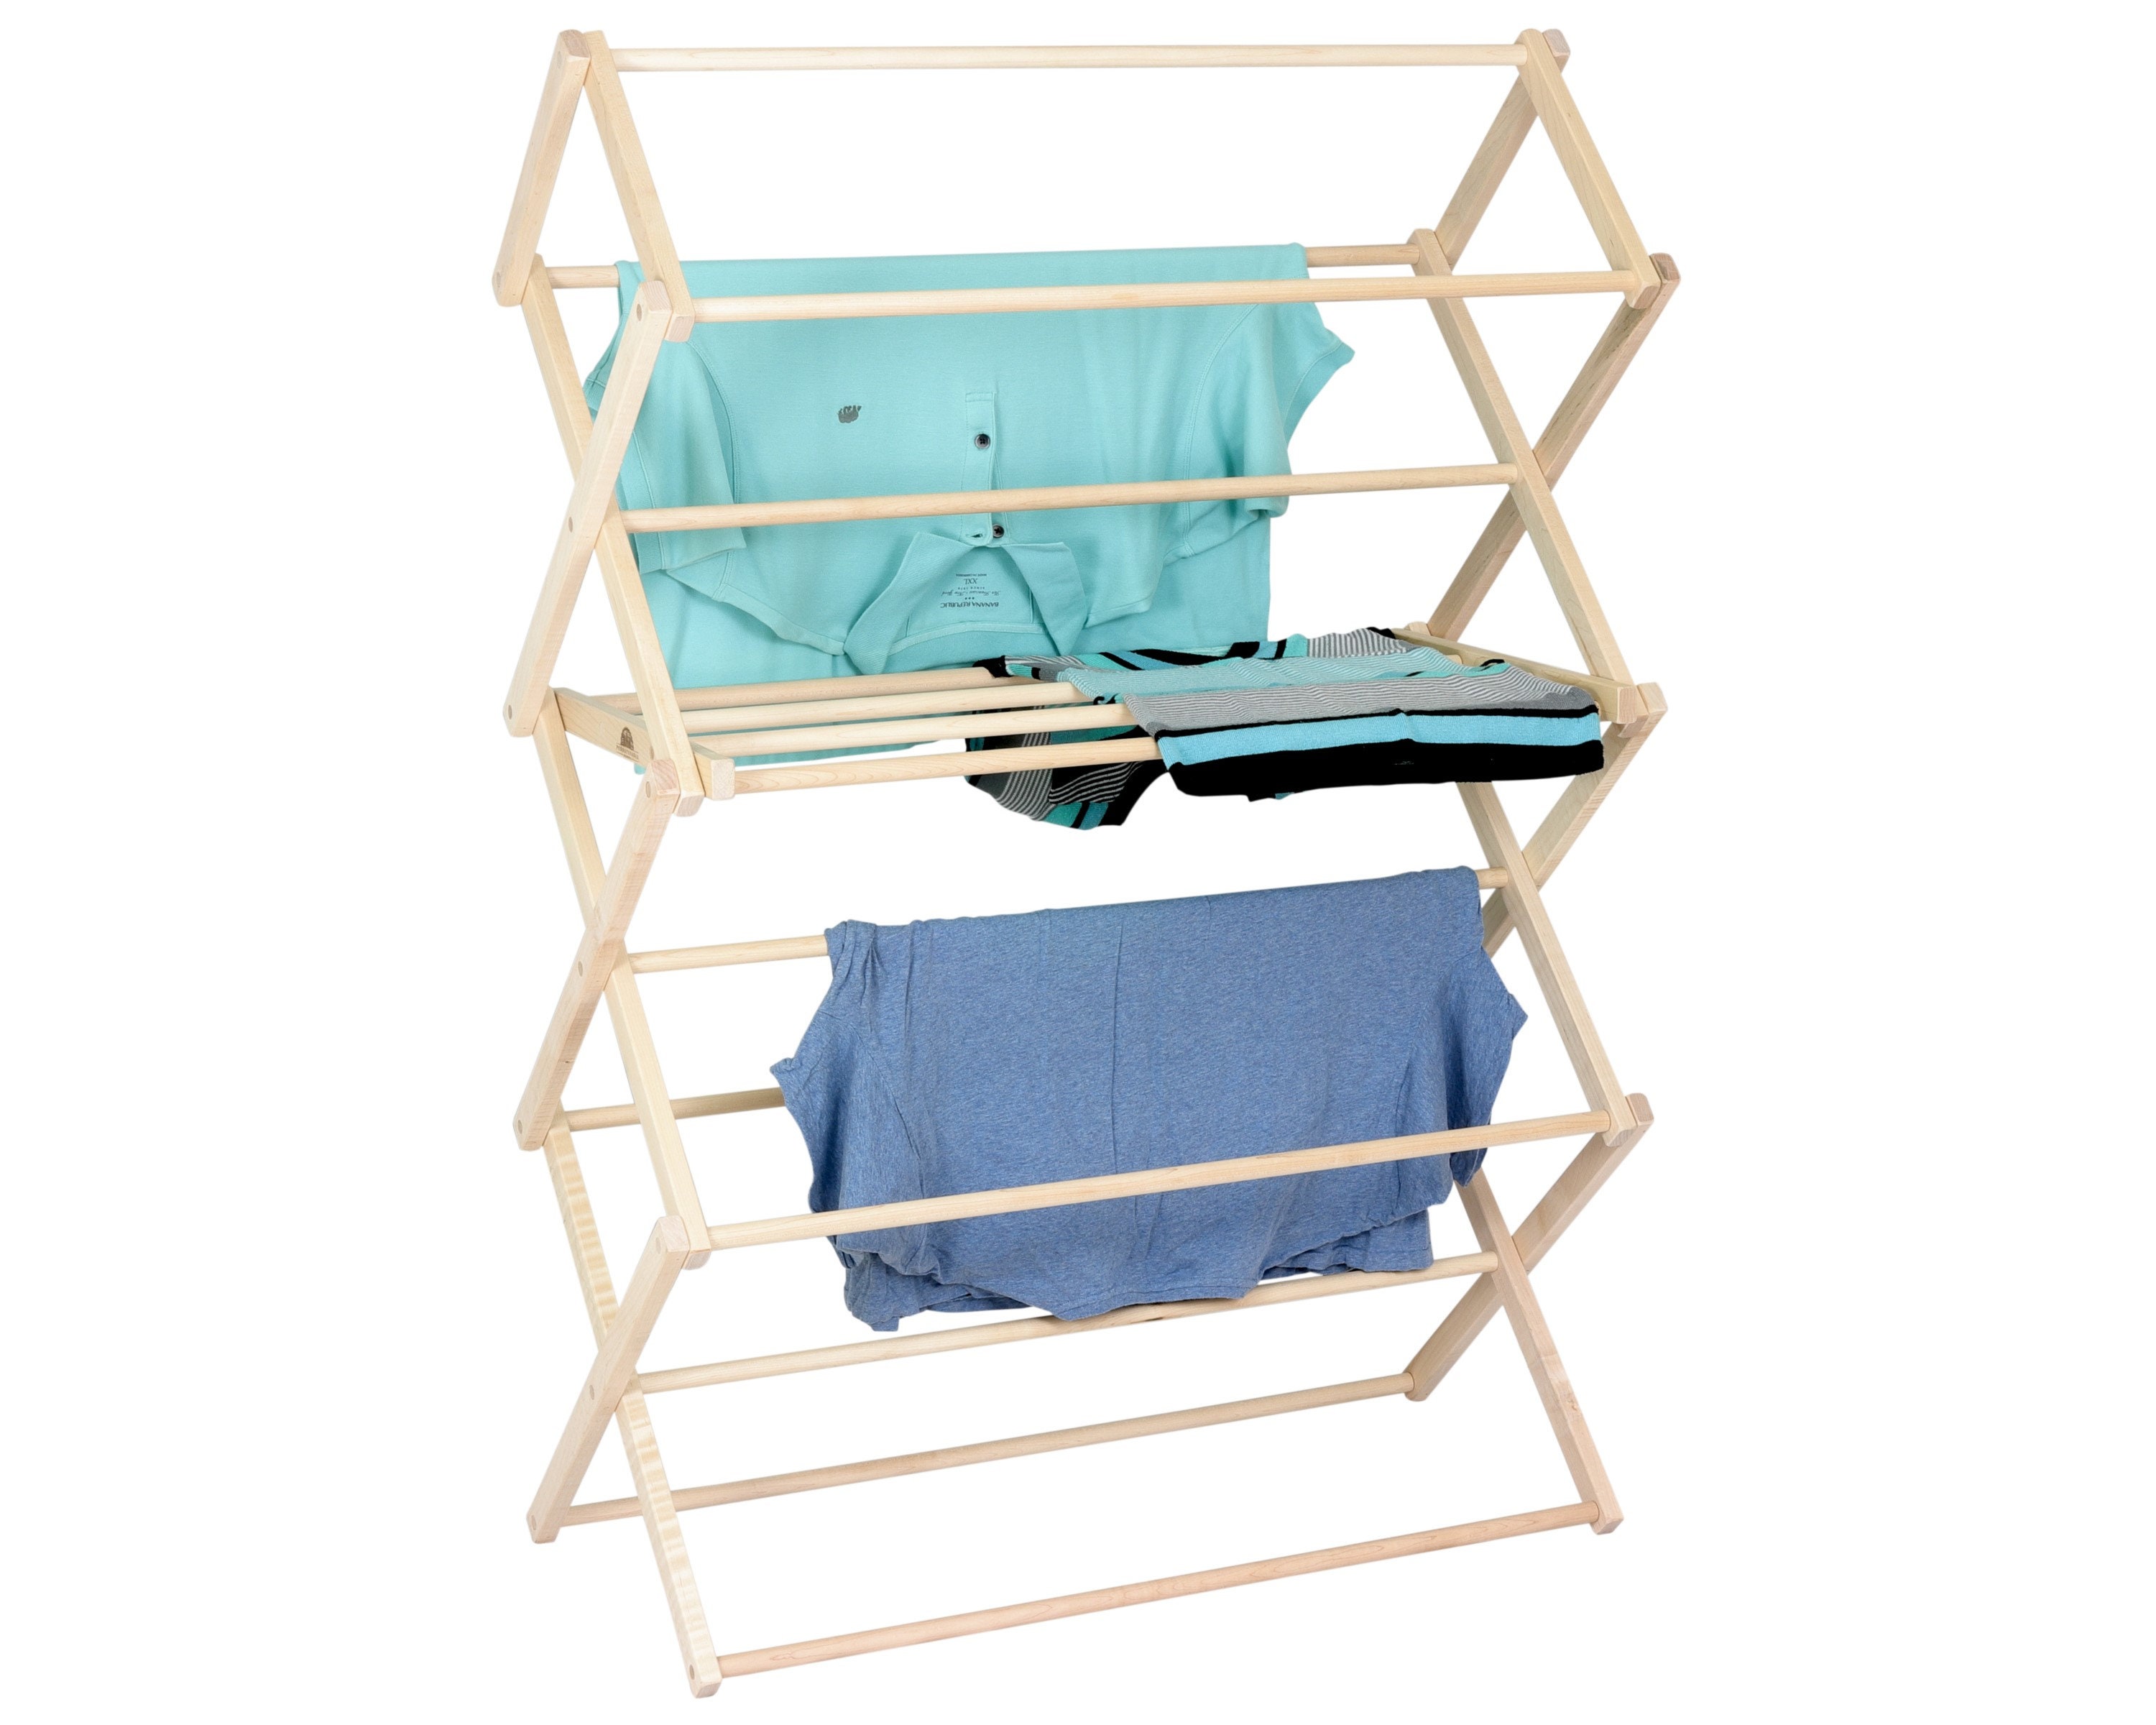 Laundry Drying Rack the Tabletop 